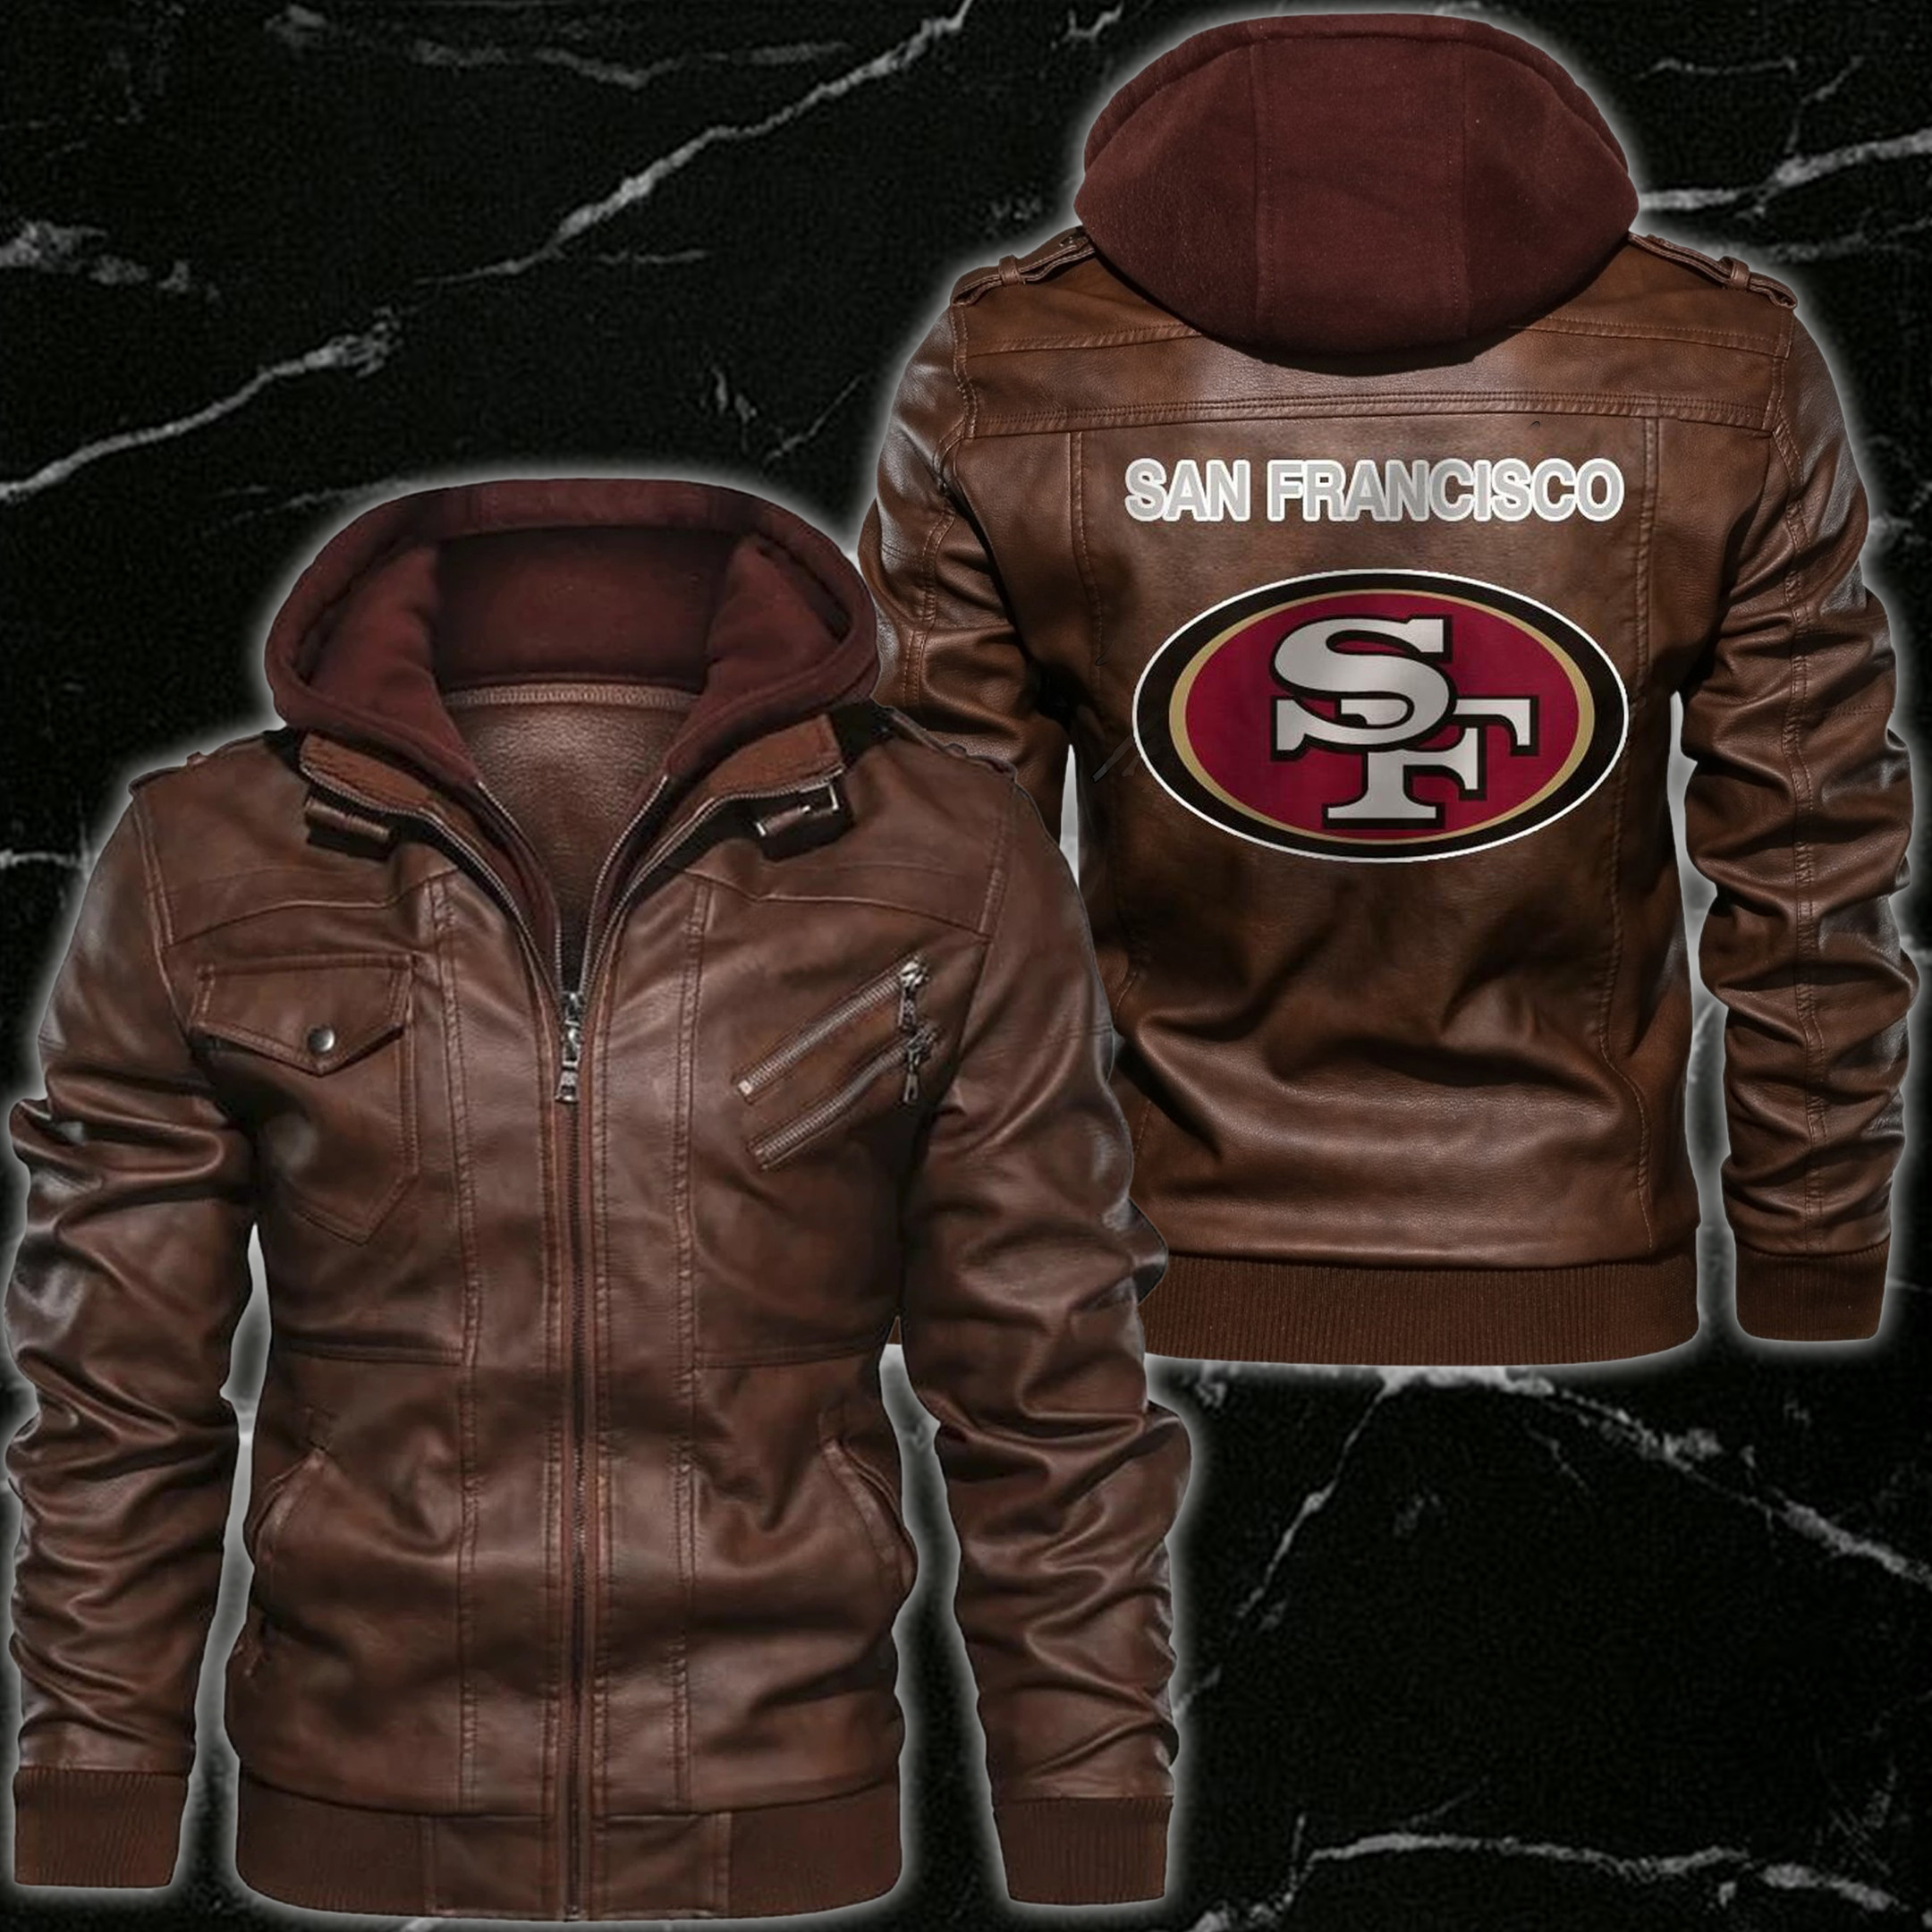 Top leather jackets and latest products 313